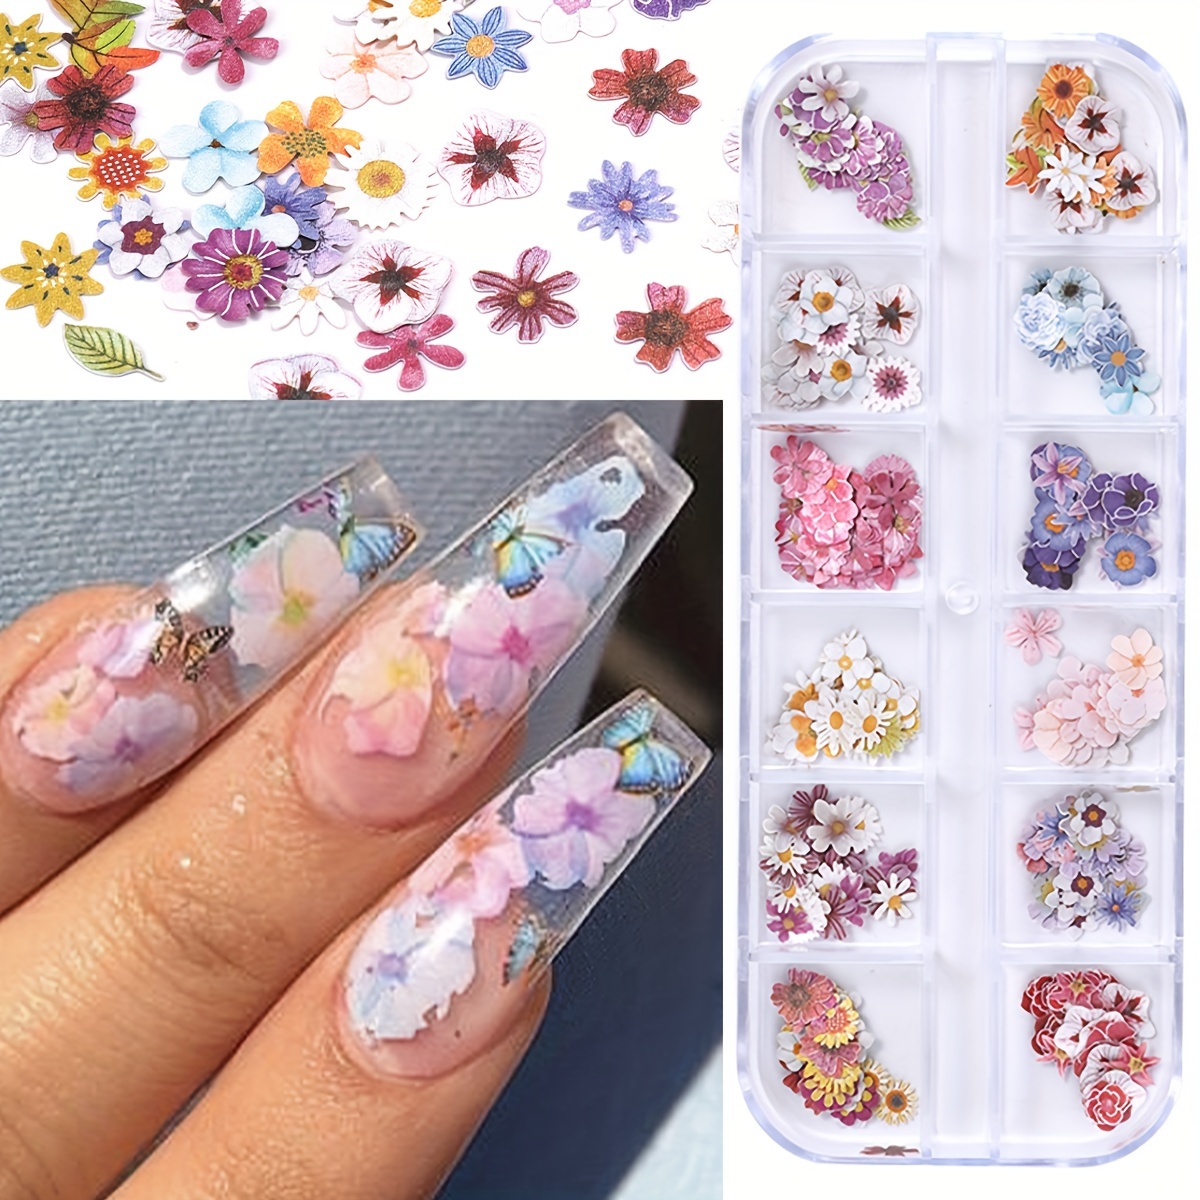 

12 Grids Natural Wood Chip Flower Nail Art Decorations, Assorted 3d Floral Design, Diy Manicure Craft Miniatures In Storage Box For Salon & Home Use